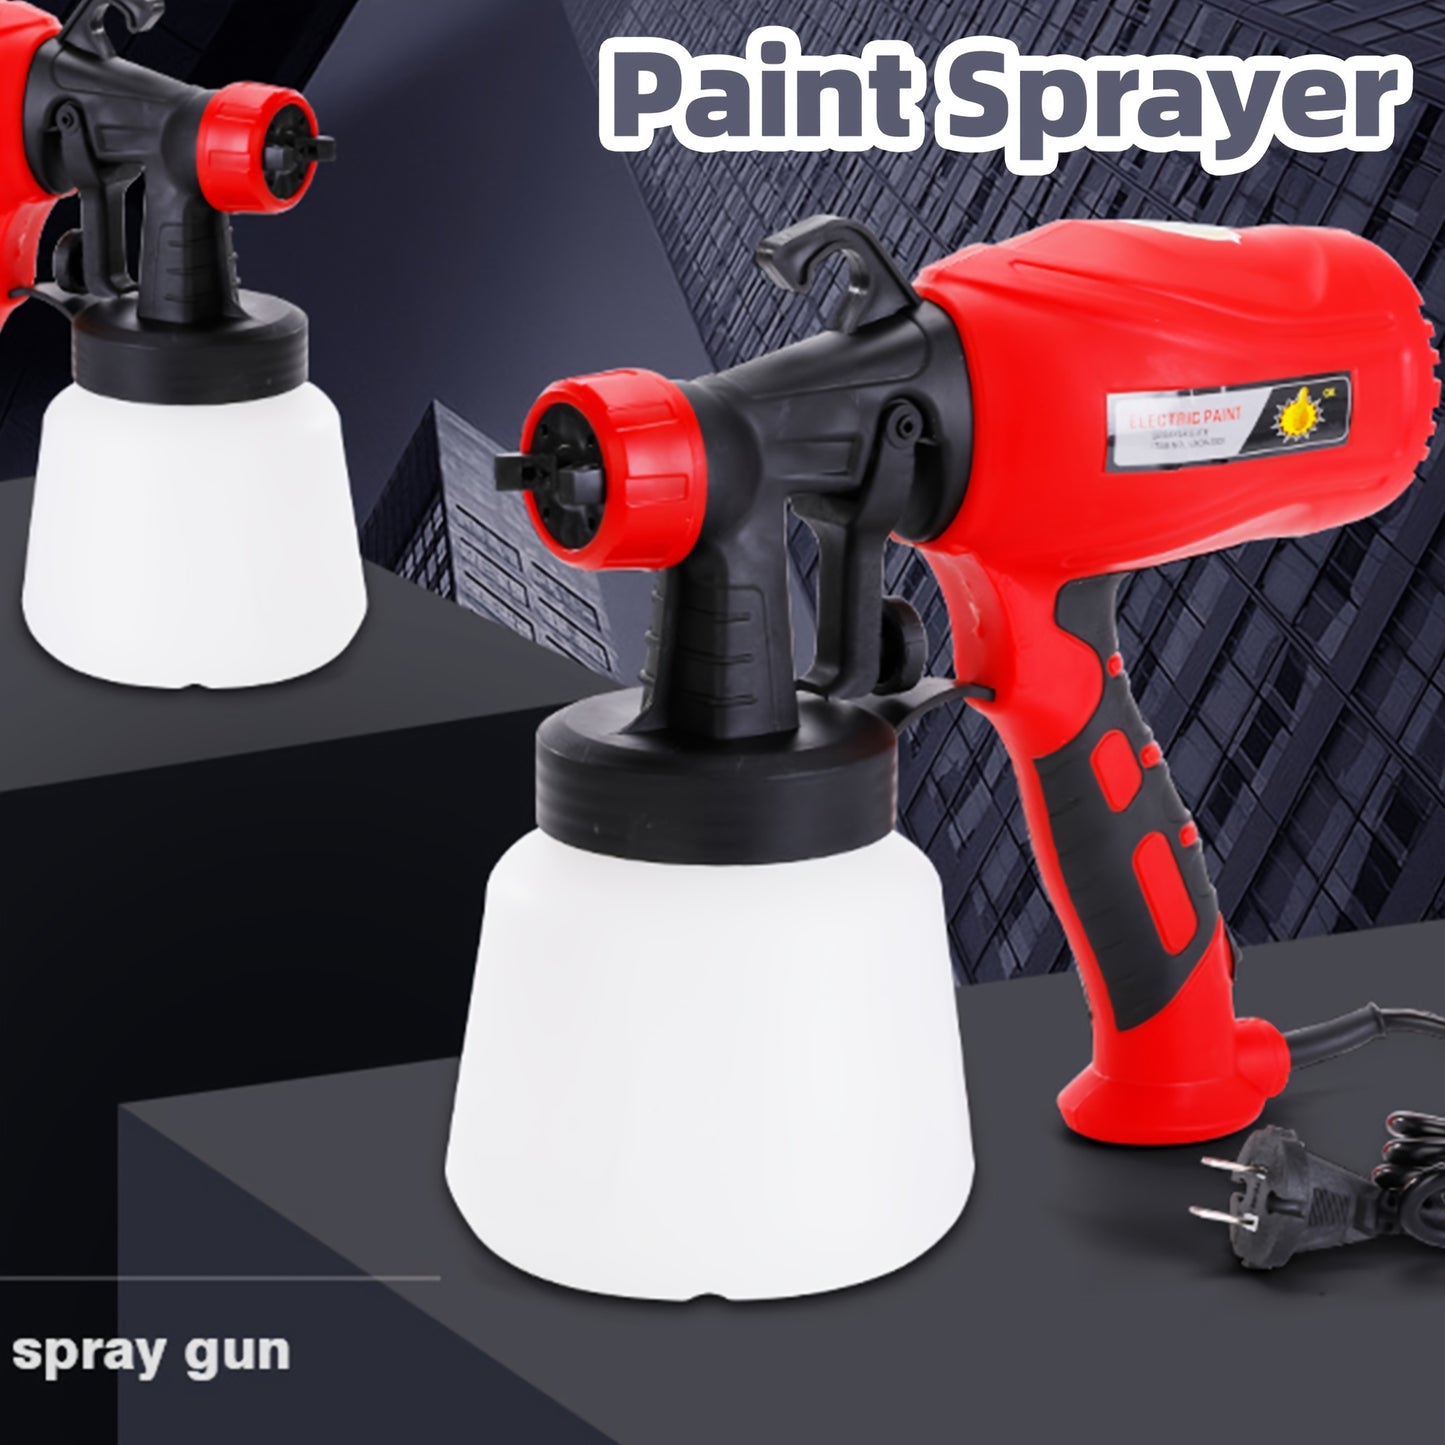 1pc Paint Sprayer, HVLP Spray Gun With Cleaning & Blowing Joints, 2 Nozzles, Easy To Clean, For Furniture, Cabinets, Fence, Walls, Door, Garden Chairs